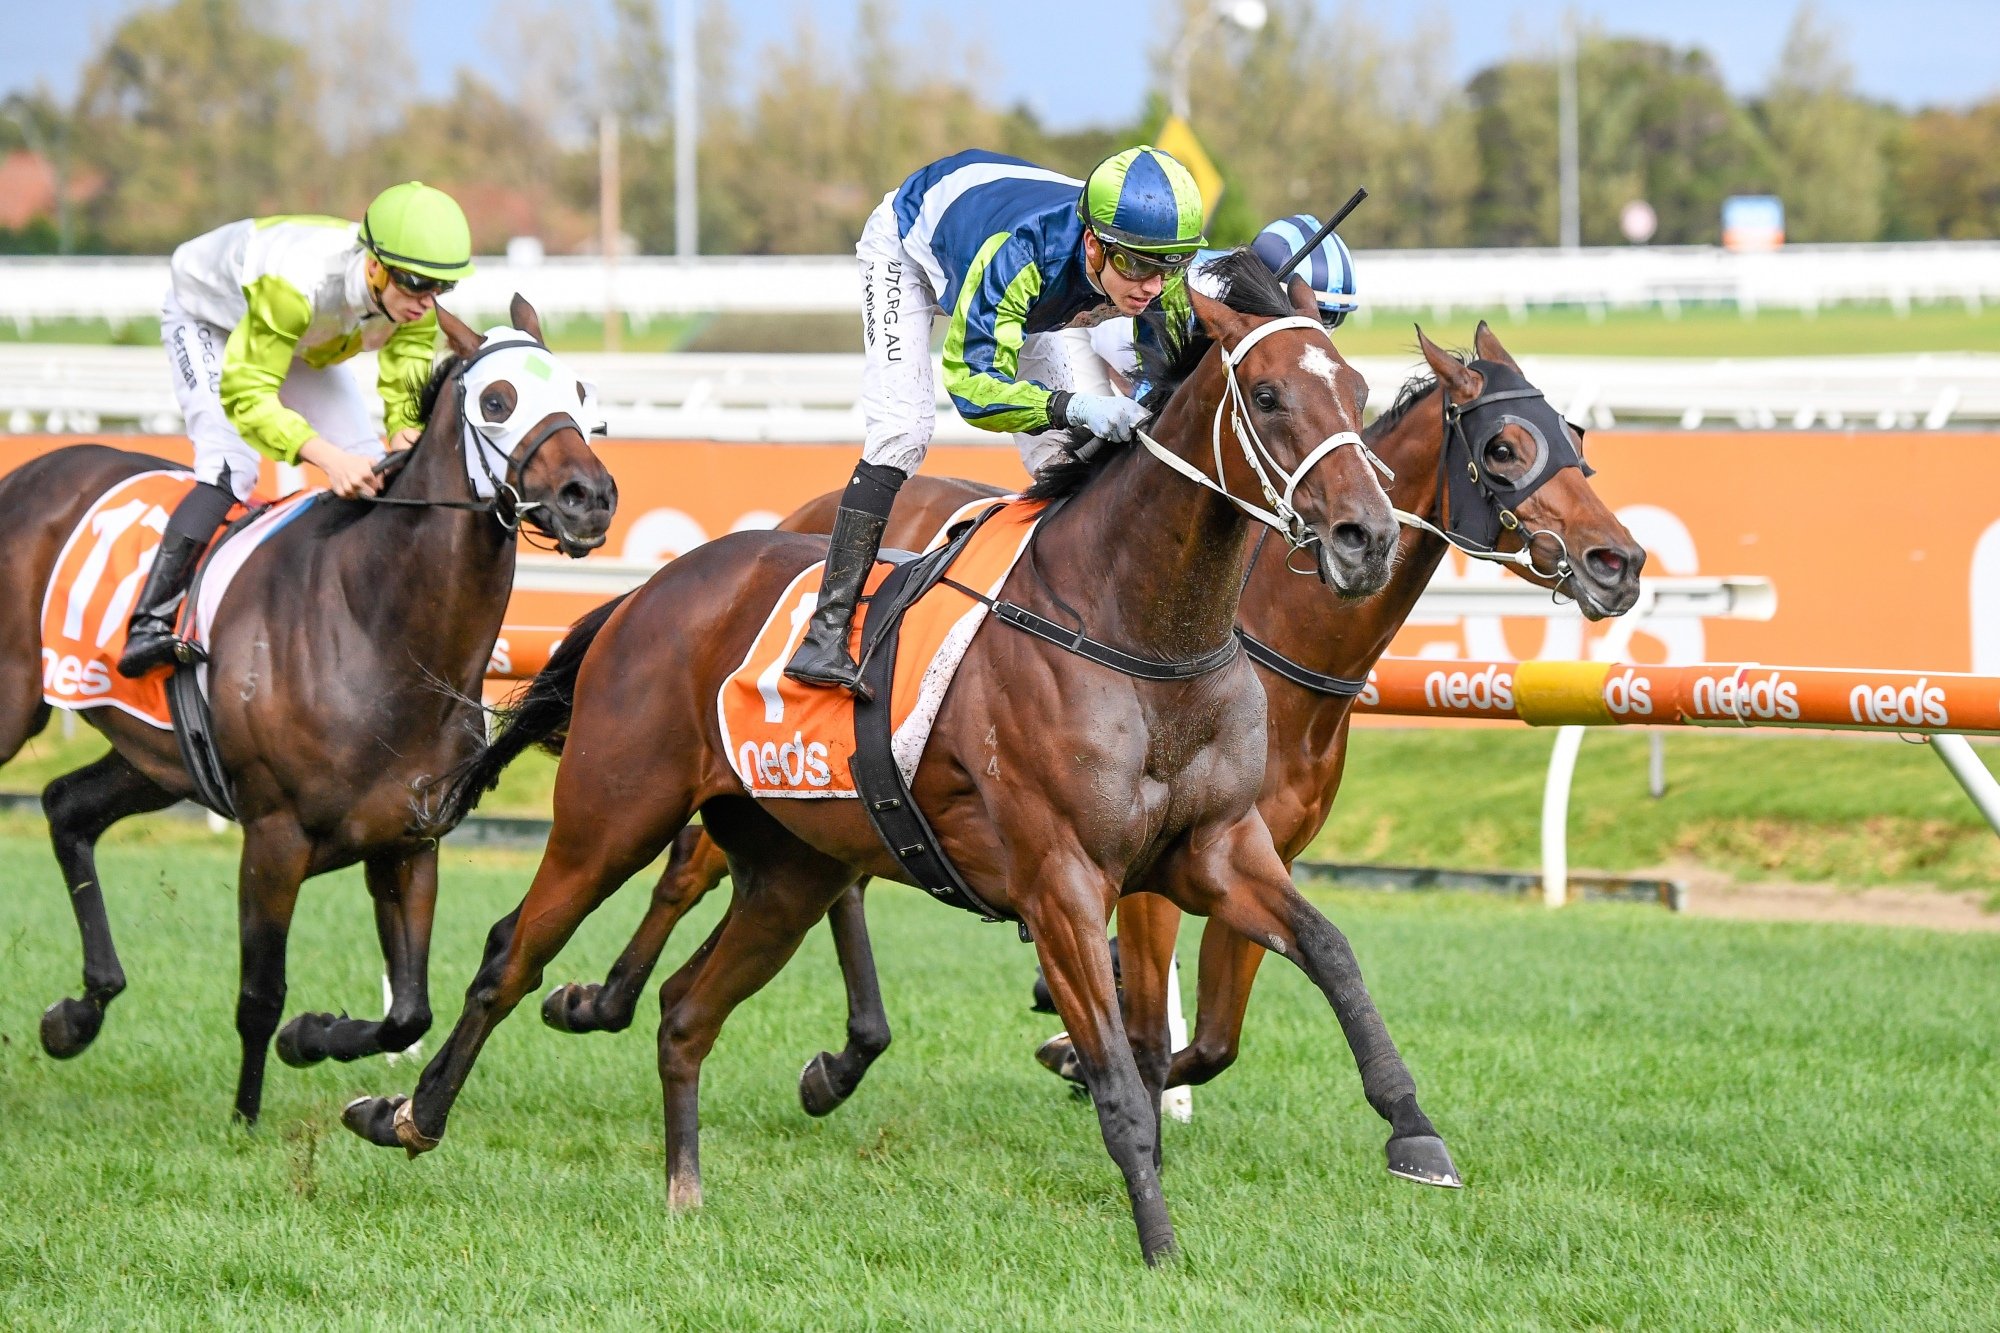 Winning habit continues for Salsamor